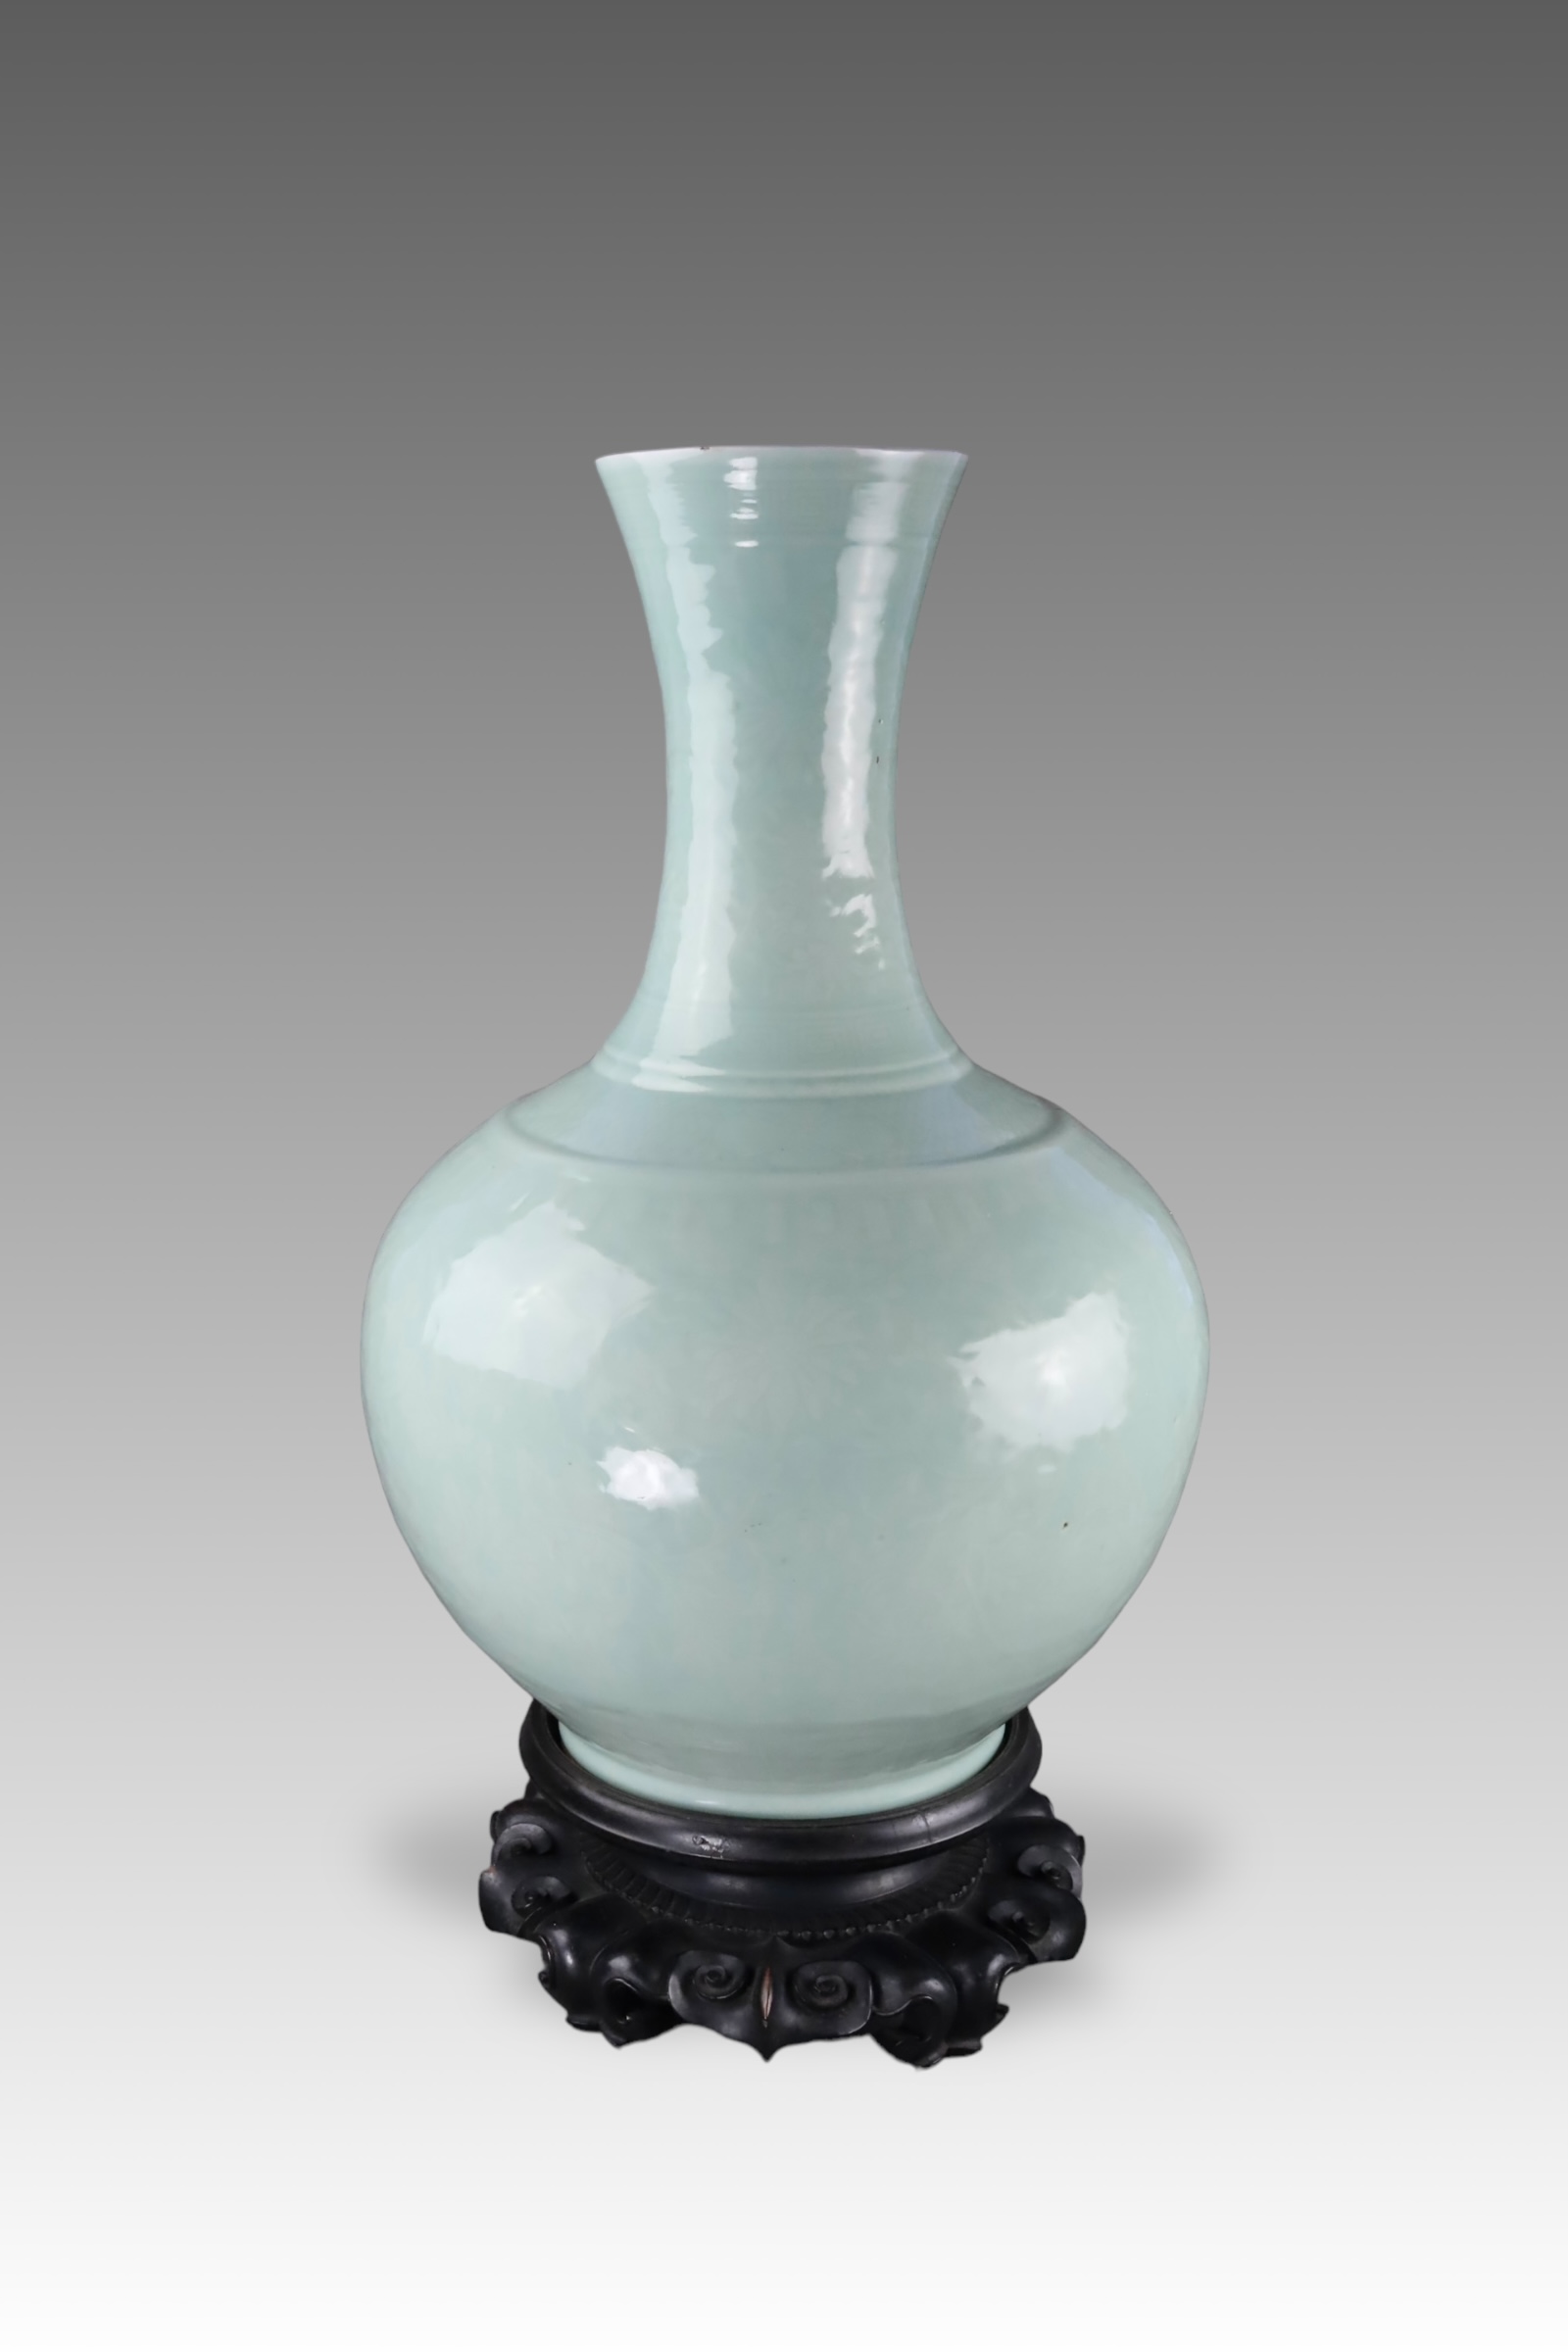 A Large Carved Celadon Bottle Vase, Tianqiuping, 19th century